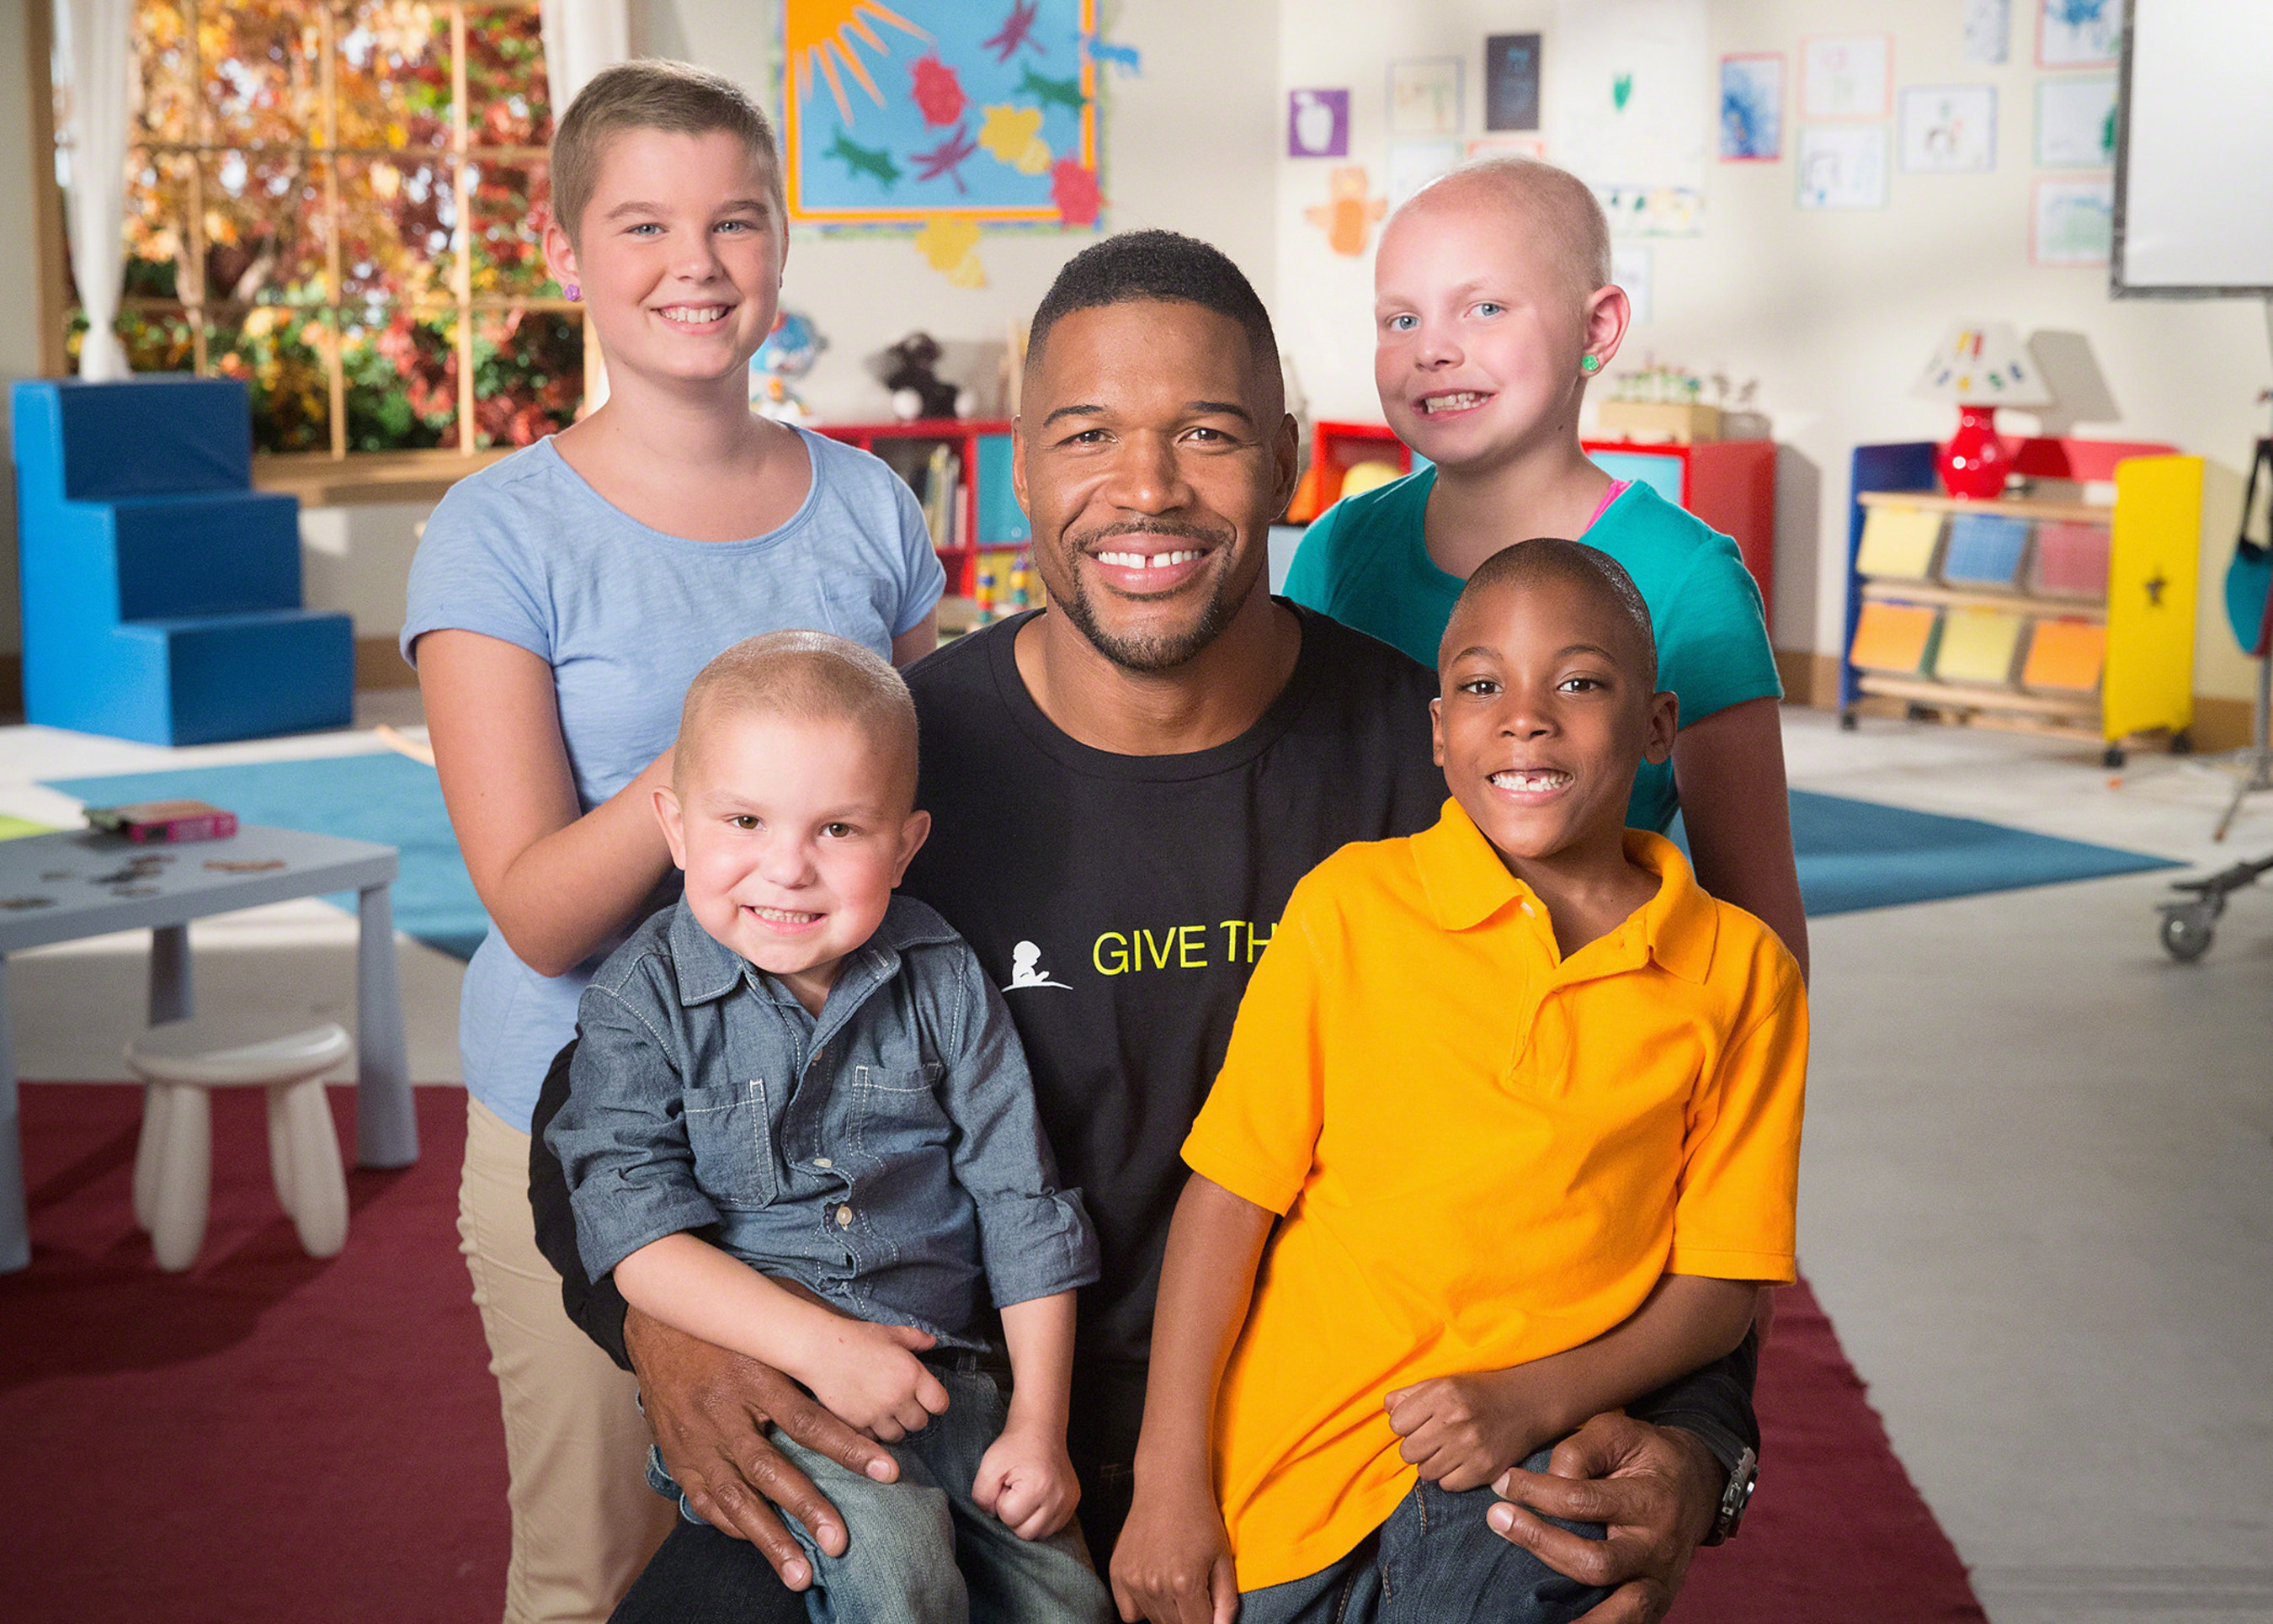 Michael Strahan is one of several celebrities to star in 11th annual St. Jude Thanks and Giving(R) campaign this holiday season (Photo credit: St. Jude Children's Research Hospital).